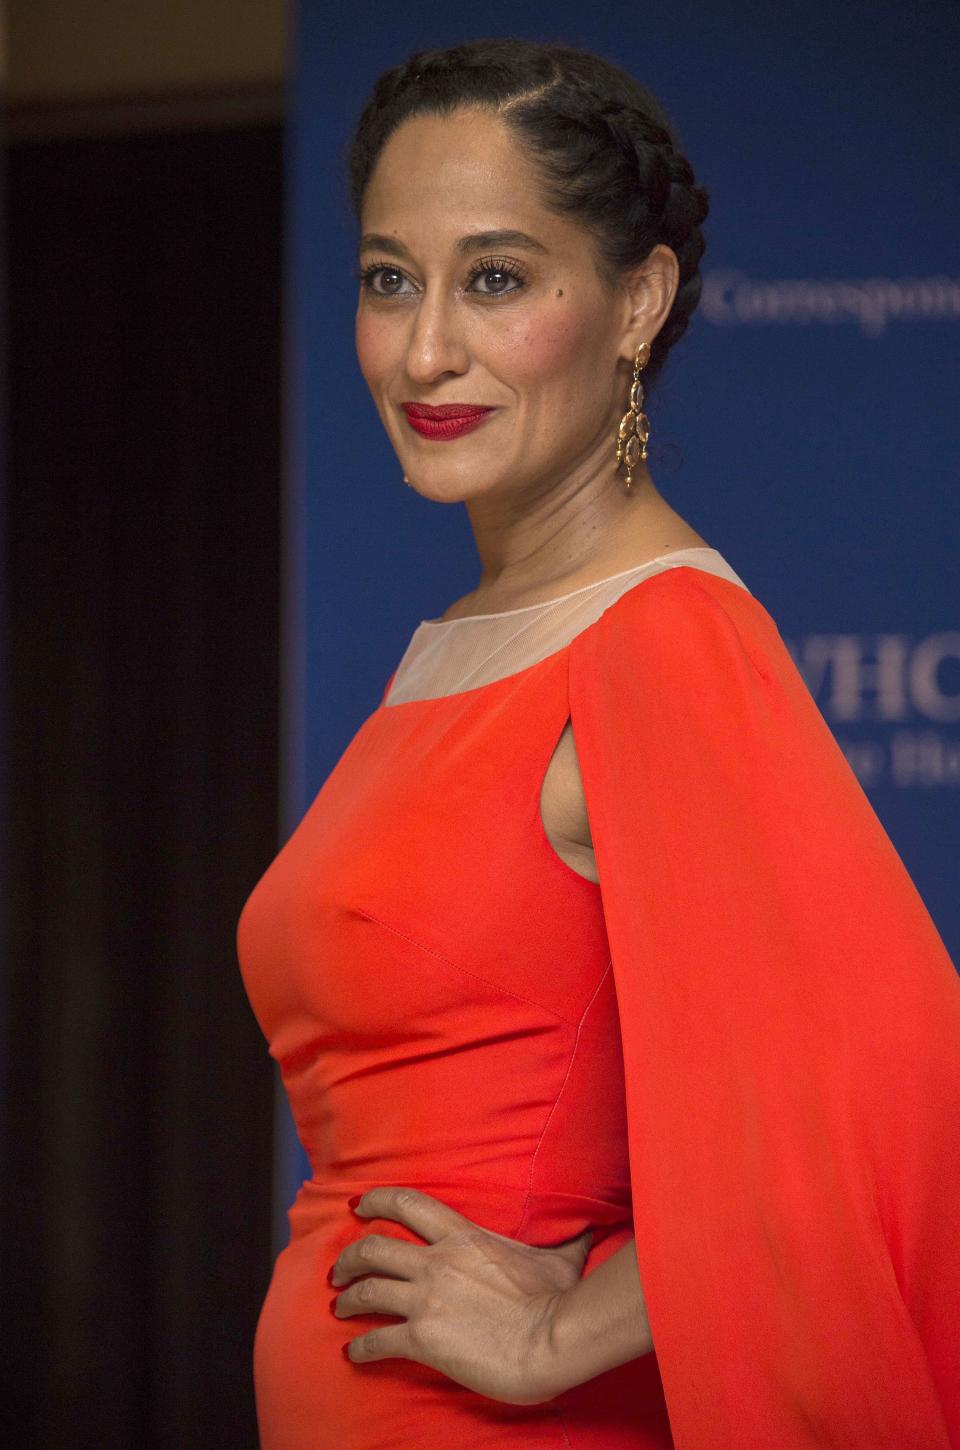 Actress Tracee Ellis Ross arrives at White House Correspondents' Association (WHCA) annual dinner in Washington, DC, on April 25, 2015.   AFP PHOTO/NICHOLAS KAMM        (Photo credit should read NICHOLAS KAMM/AFP/Getty Images)